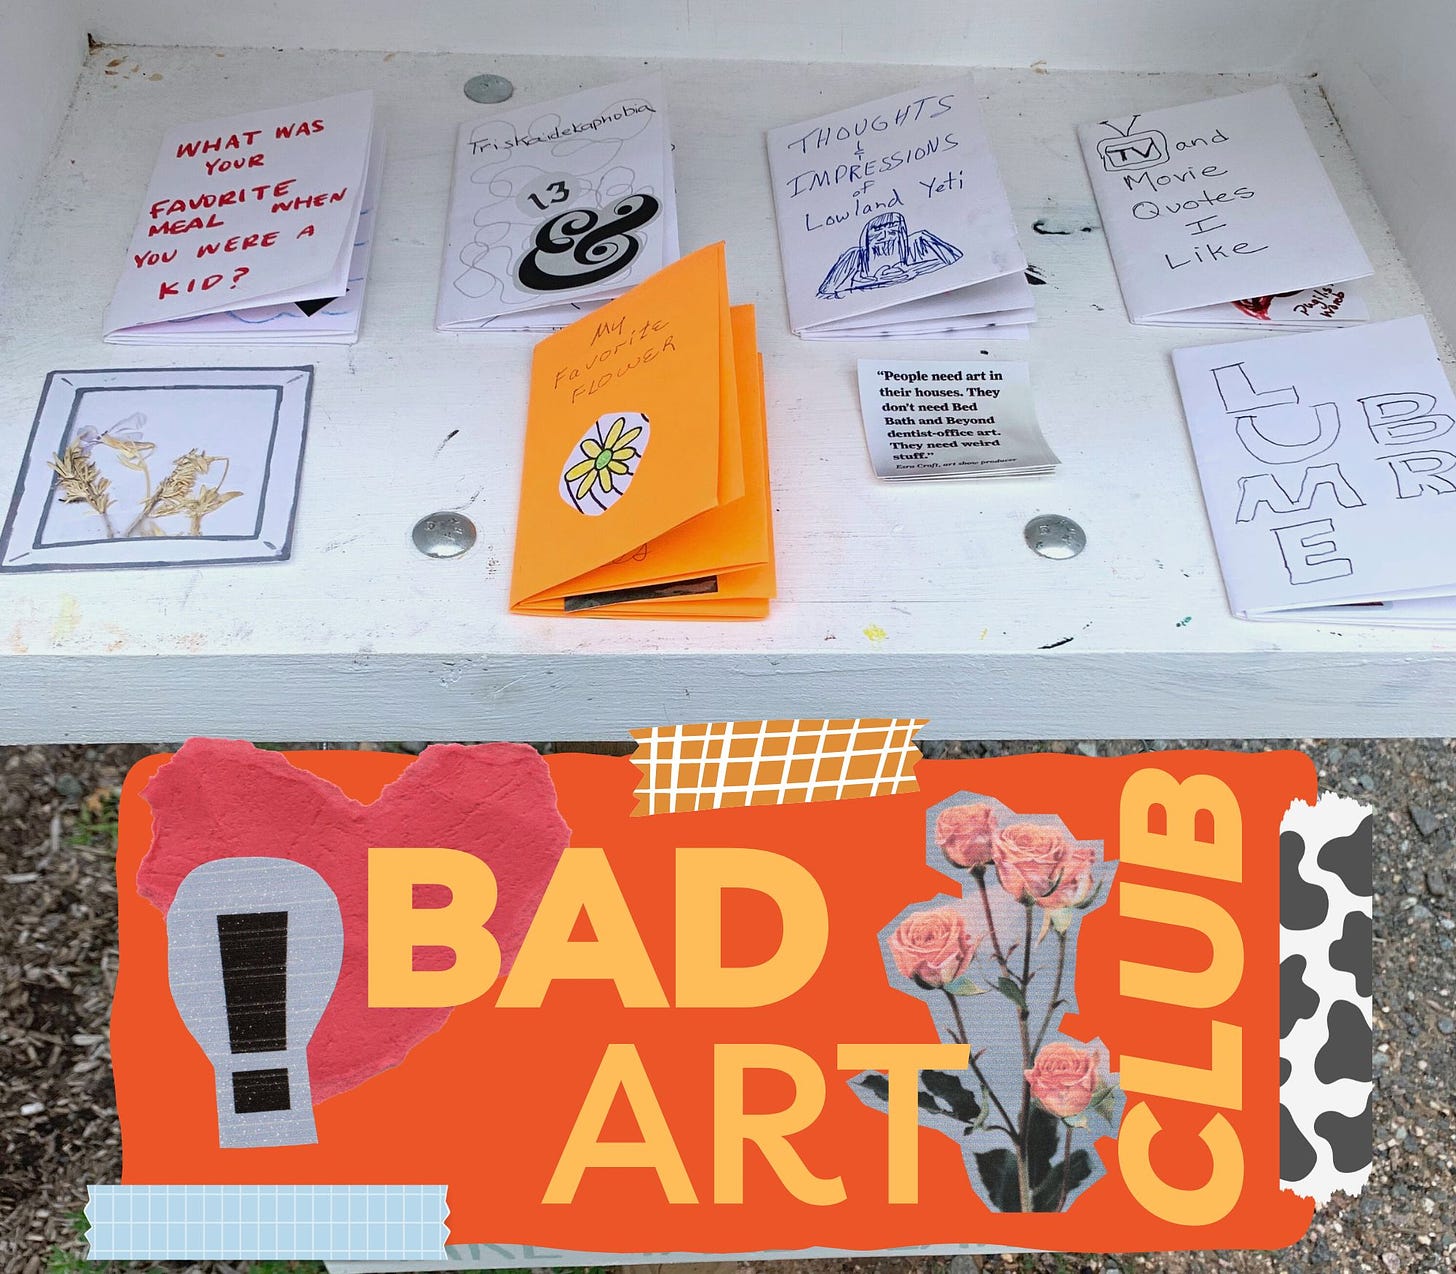 7 zines and a stack of stickers inside of the Free Little Art Gallery box. "Bad Art Club" is written in orange below the image with collage elements surrounding it.